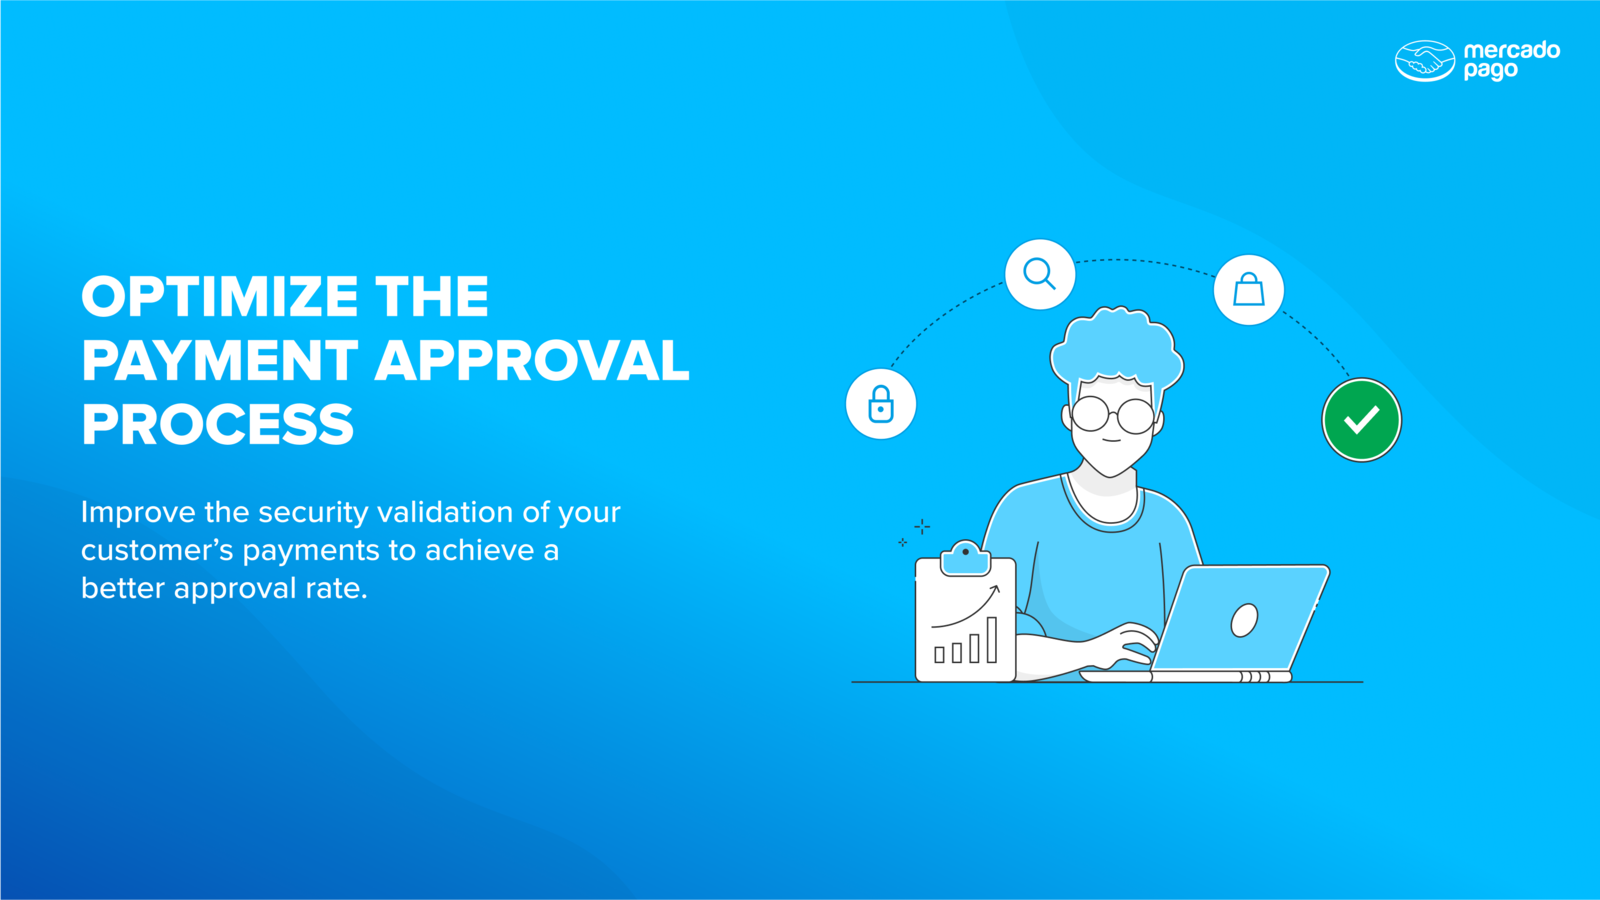 Optimize the payment approval process